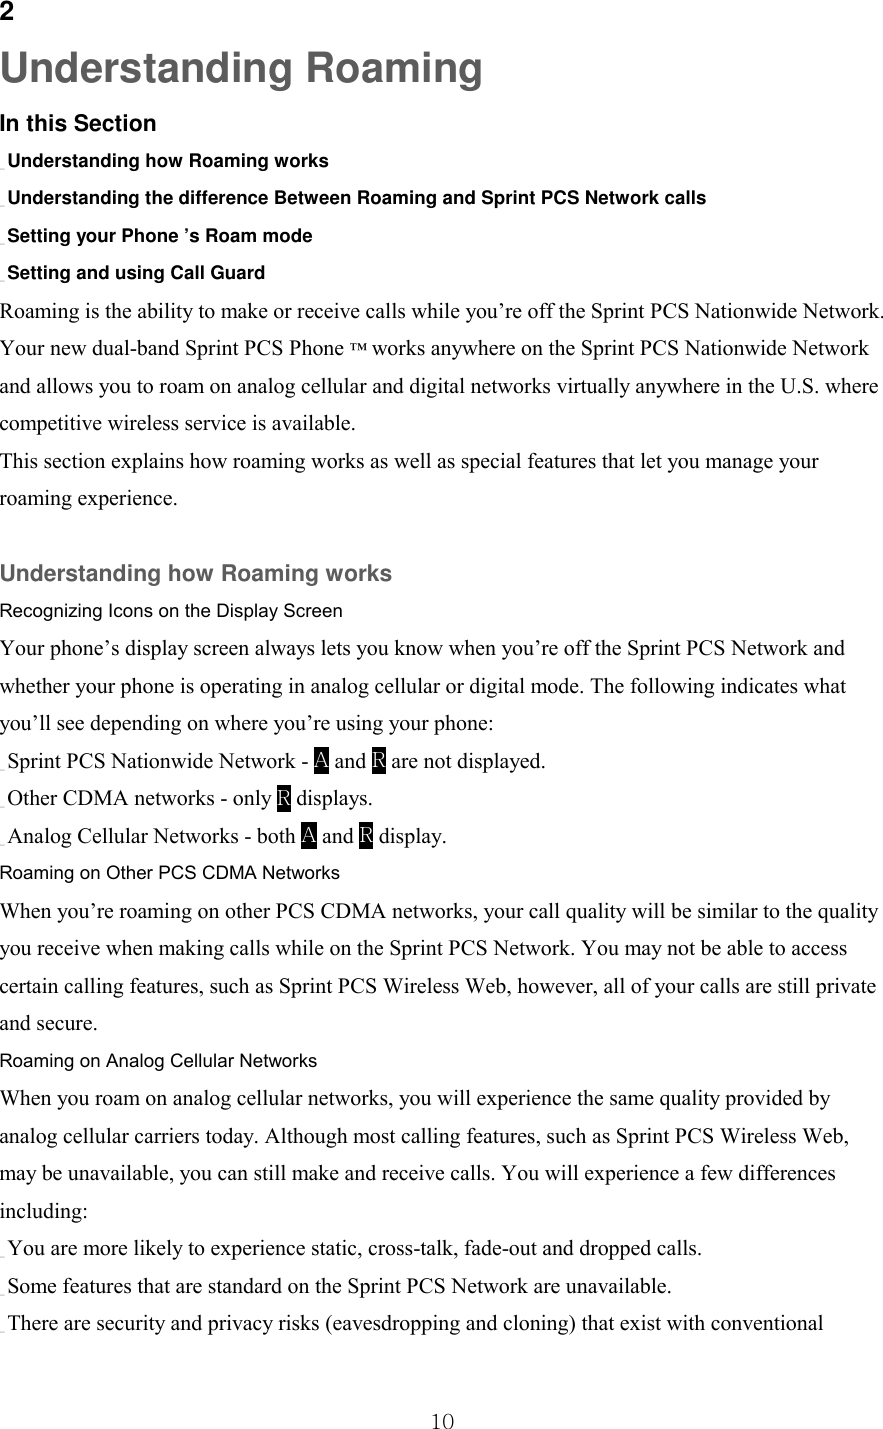  10 2 Understanding Roaming In this Section _ Understanding how Roaming works _ Understanding the difference Between Roaming and Sprint PCS Network calls _ Setting your Phone ’s Roam mode _ Setting and using Call Guard Roaming is the ability to make or receive calls while you’re off the Sprint PCS Nationwide Network. Your new dual-band Sprint PCS Phone ™ works anywhere on the Sprint PCS Nationwide Network and allows you to roam on analog cellular and digital networks virtually anywhere in the U.S. where competitive wireless service is available. This section explains how roaming works as well as special features that let you manage your roaming experience.  Understanding how Roaming works Recognizing Icons on the Display Screen Your phone’s display screen always lets you know when you’re off the Sprint PCS Network and whether your phone is operating in analog cellular or digital mode. The following indicates what you’ll see depending on where you’re using your phone: _ Sprint PCS Nationwide Network - A and R are not displayed. _ Other CDMA networks - only R displays. _ Analog Cellular Networks - both A and R display. Roaming on Other PCS CDMA Networks When you’re roaming on other PCS CDMA networks, your call quality will be similar to the quality you receive when making calls while on the Sprint PCS Network. You may not be able to access certain calling features, such as Sprint PCS Wireless Web, however, all of your calls are still private and secure. Roaming on Analog Cellular Networks When you roam on analog cellular networks, you will experience the same quality provided by analog cellular carriers today. Although most calling features, such as Sprint PCS Wireless Web, may be unavailable, you can still make and receive calls. You will experience a few differences including: _ You are more likely to experience static, cross-talk, fade-out and dropped calls. _ Some features that are standard on the Sprint PCS Network are unavailable. _ There are security and privacy risks (eavesdropping and cloning) that exist with conventional 